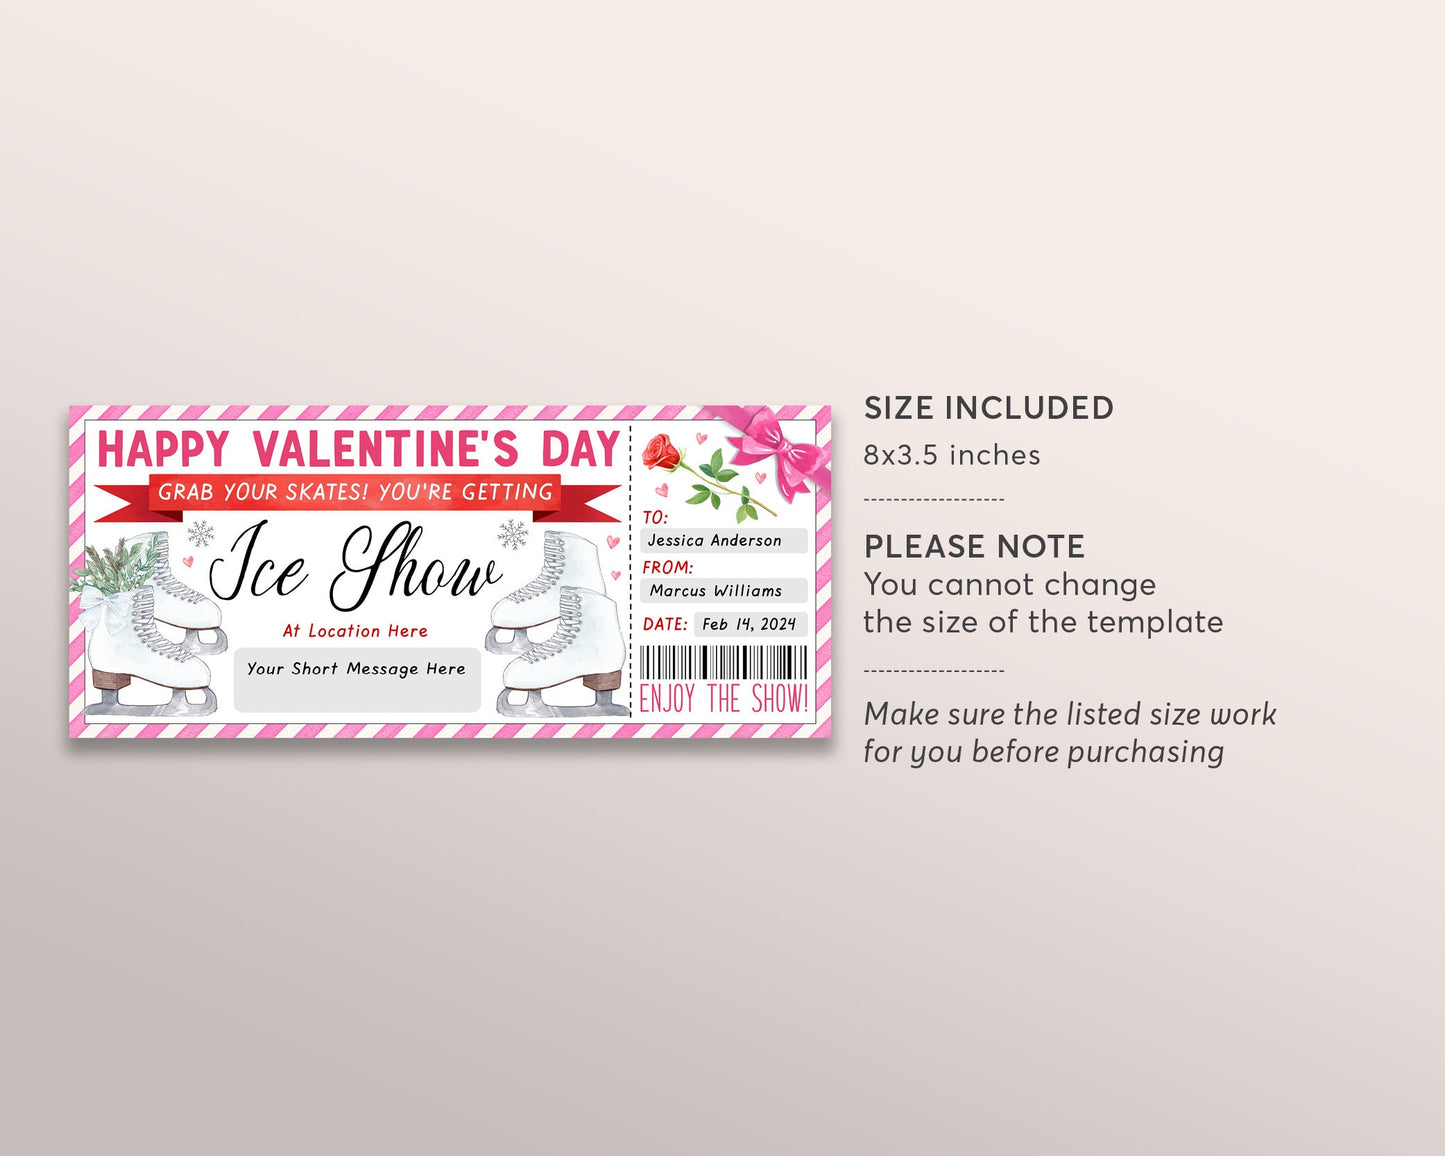 Valentines Day Ice Show Gift Voucher Editable Template, Anniversary Surprise Ice Skating Show Event Gift Certificate For Her, Sports Coupon